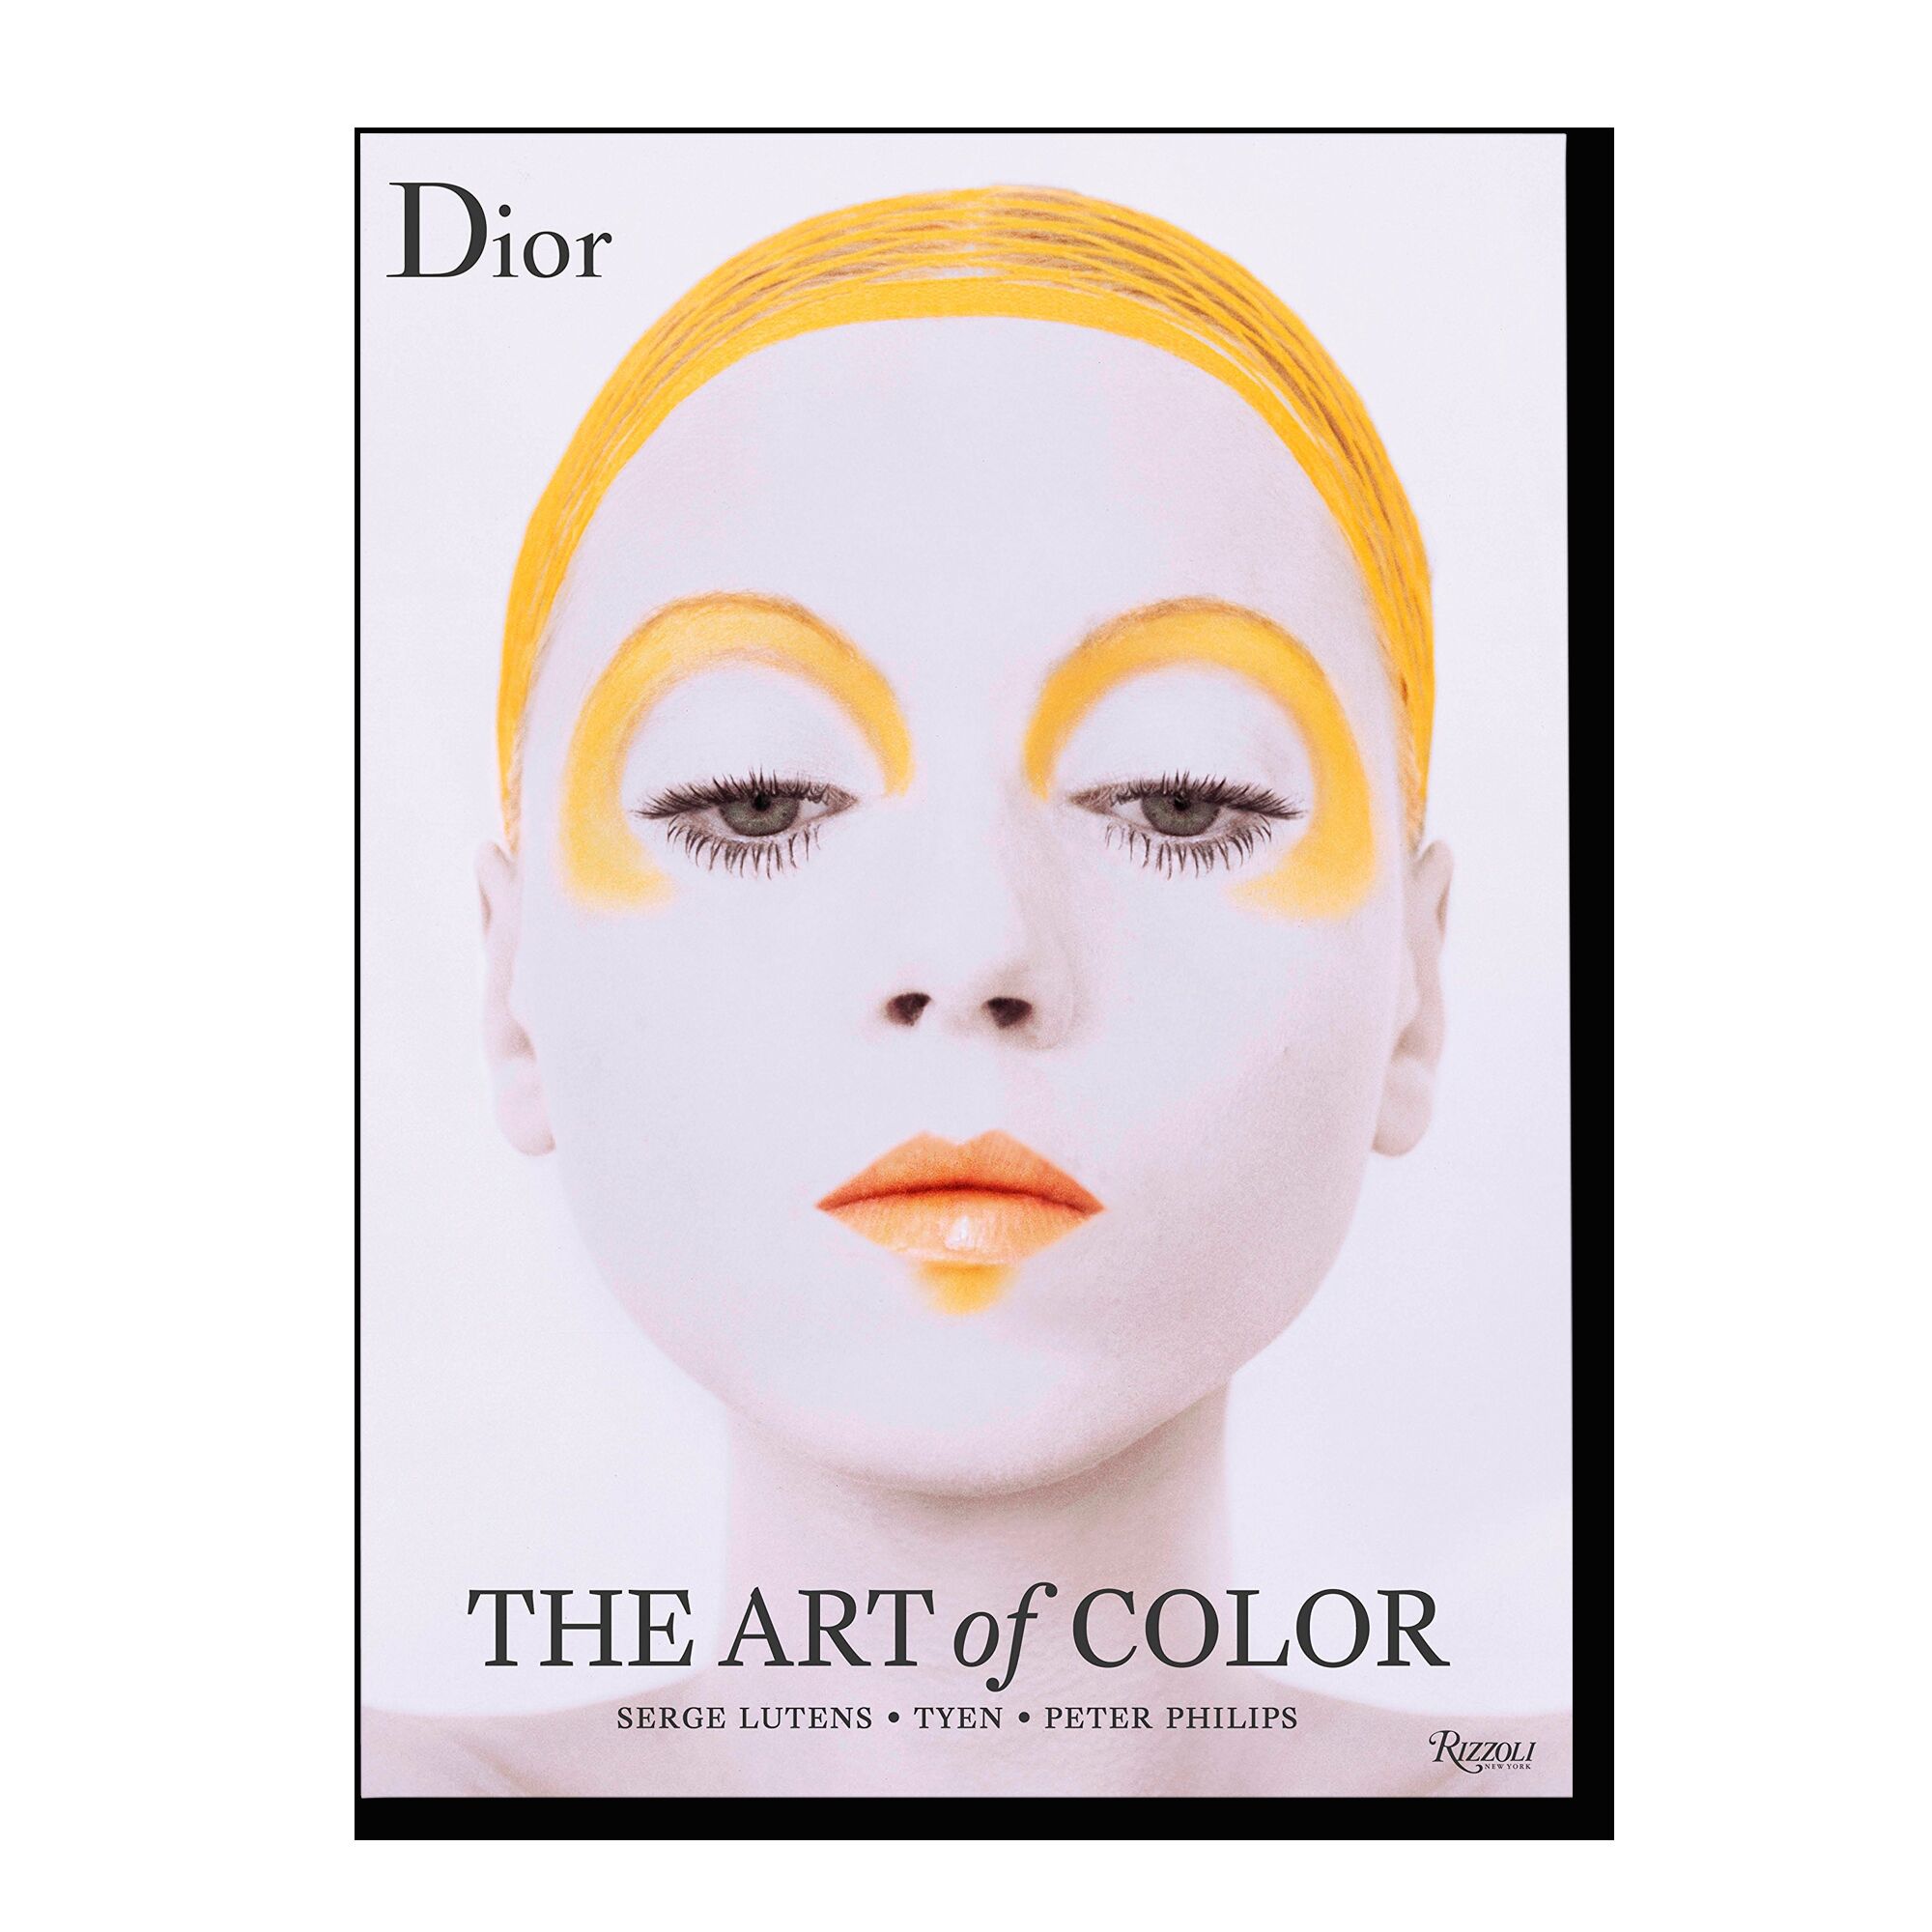 Dior: The Art of Color